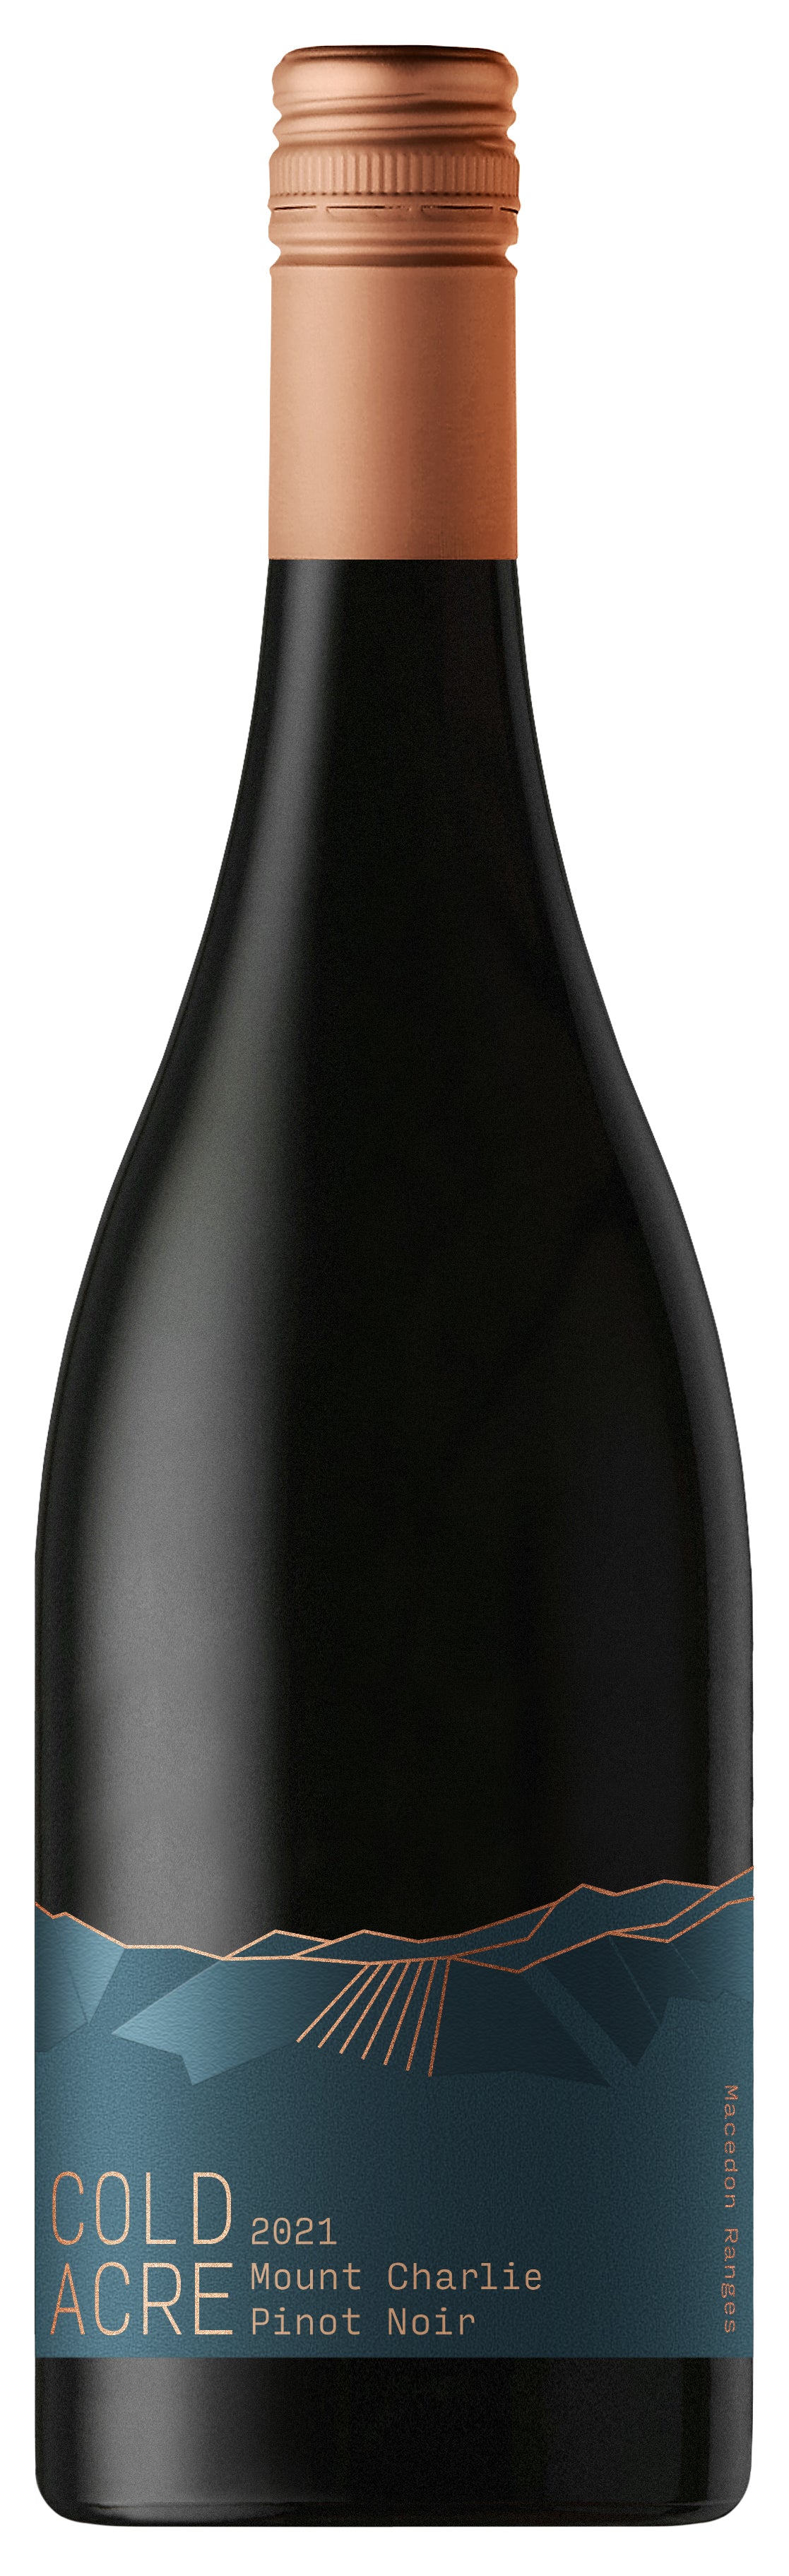 2021 Cold Acre Mount Charlie Pinot Noir